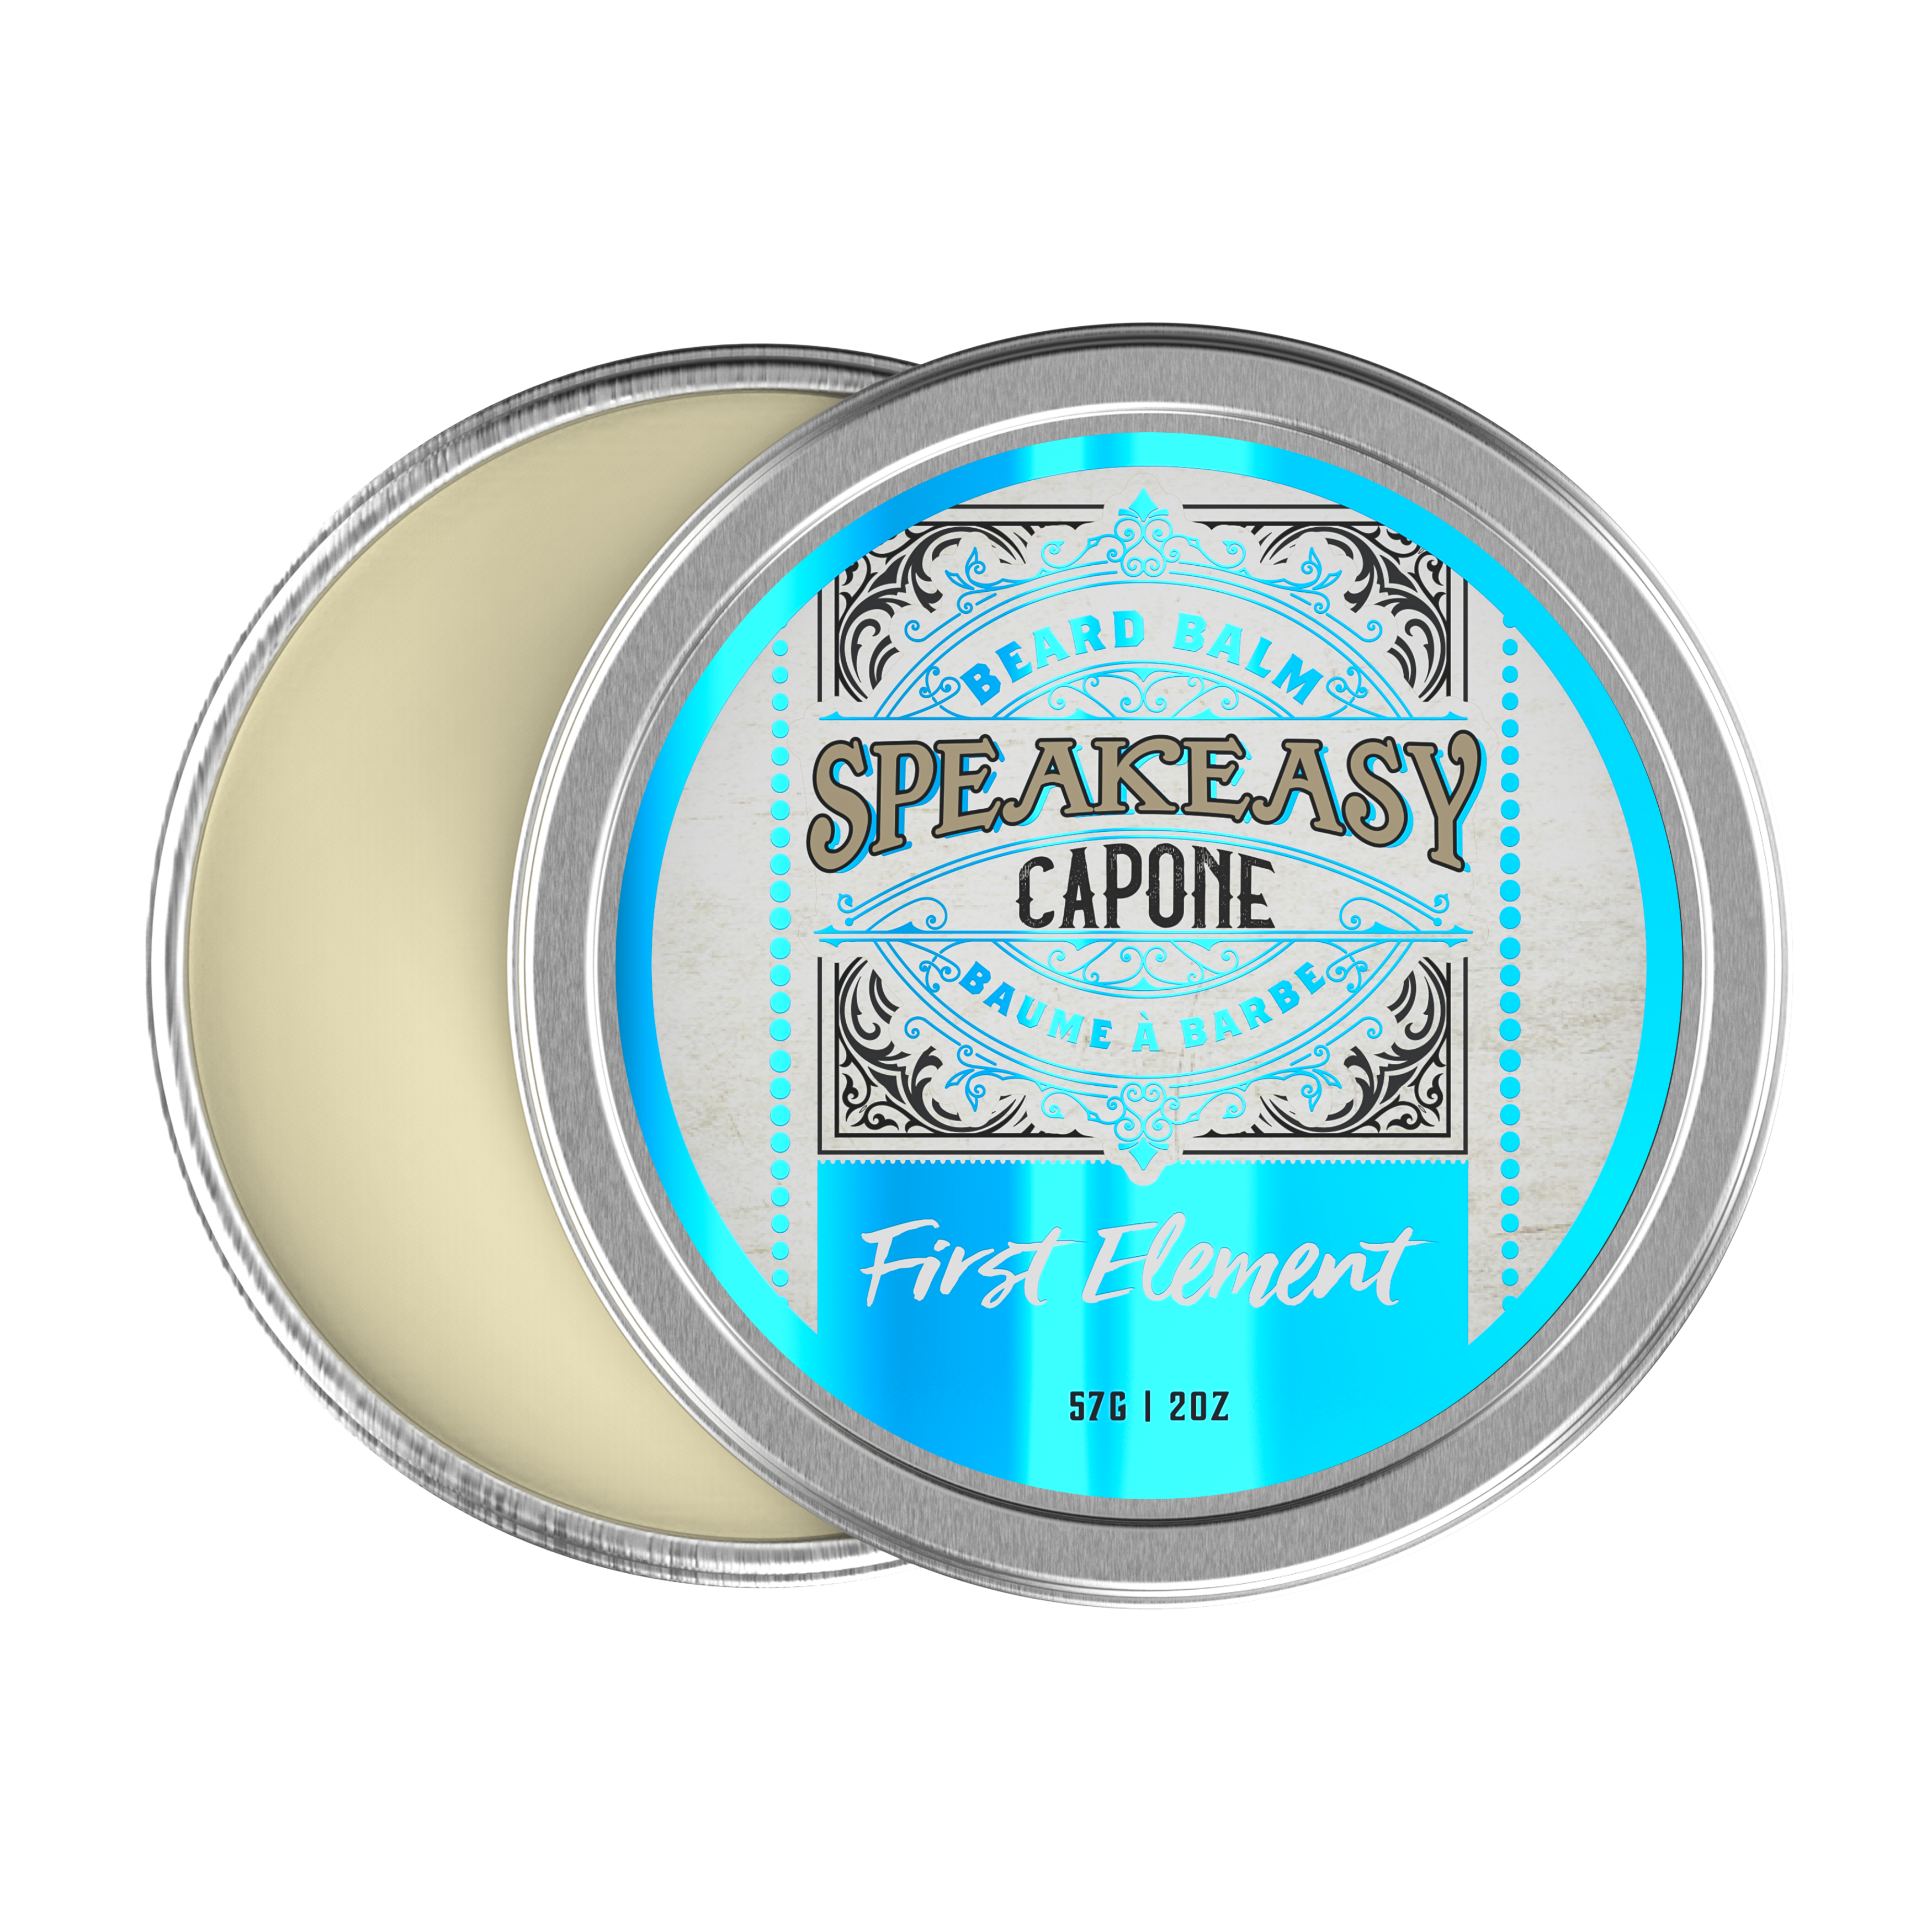 Speakeasy Capone Beard Balm. Hand-poured in small batches and proudly made in Canada, our beard balm comes in a convenient 2oz metal tin with a secure screw-on top and tamper-evident seal. Elevate your grooming routine with our beard balm, because every beard deserves the best care.